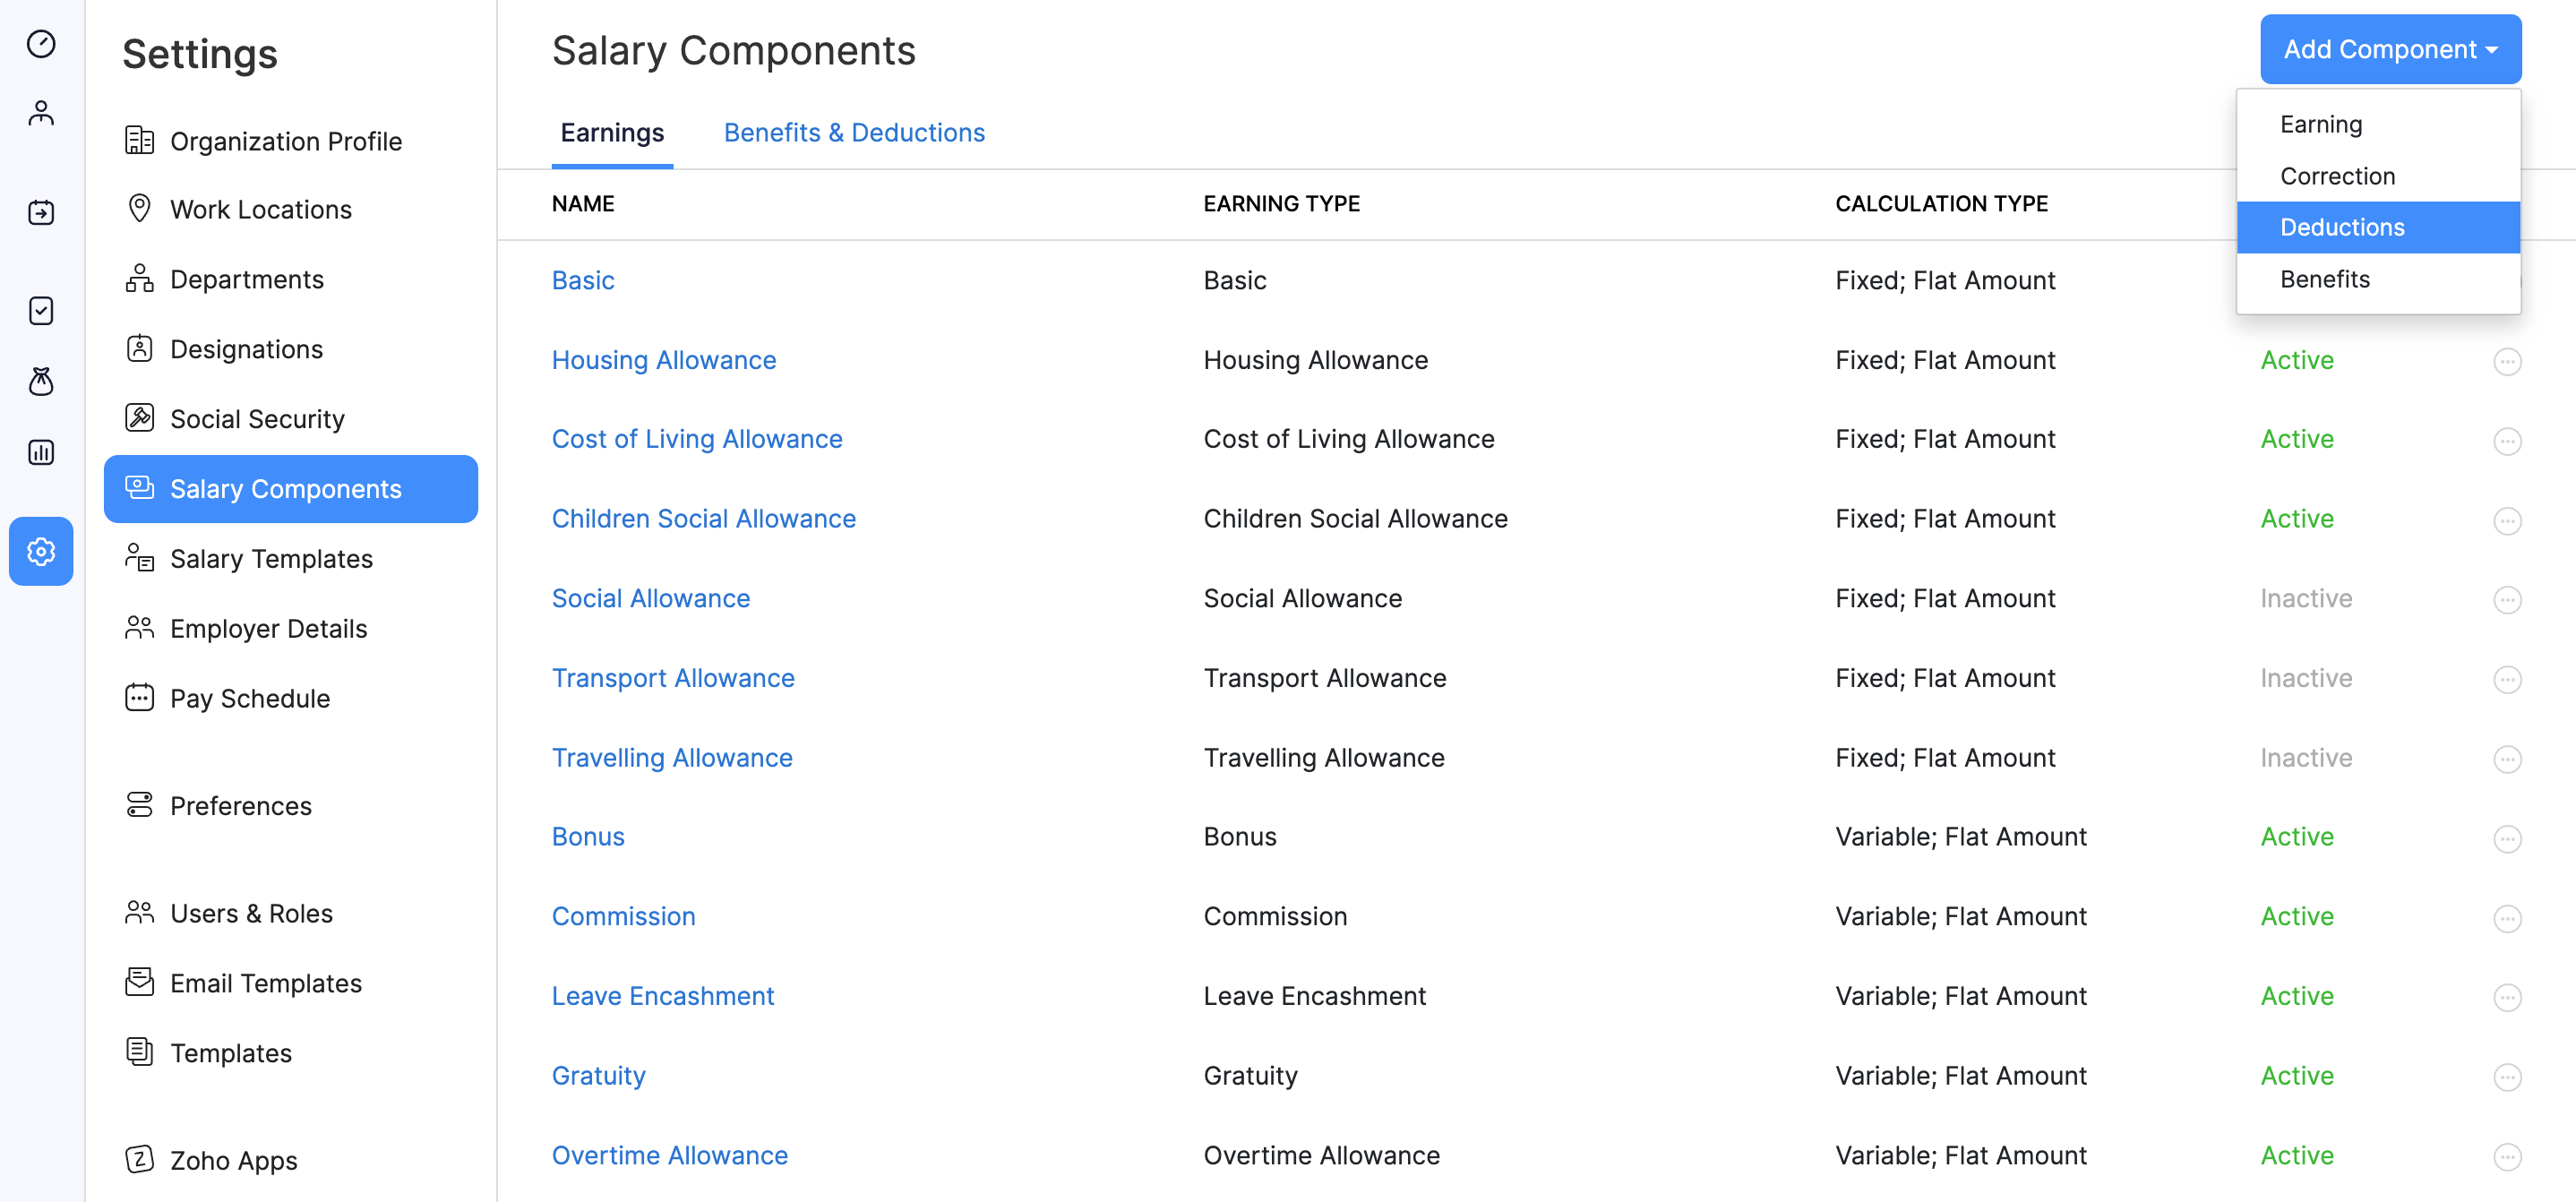 Salary Components